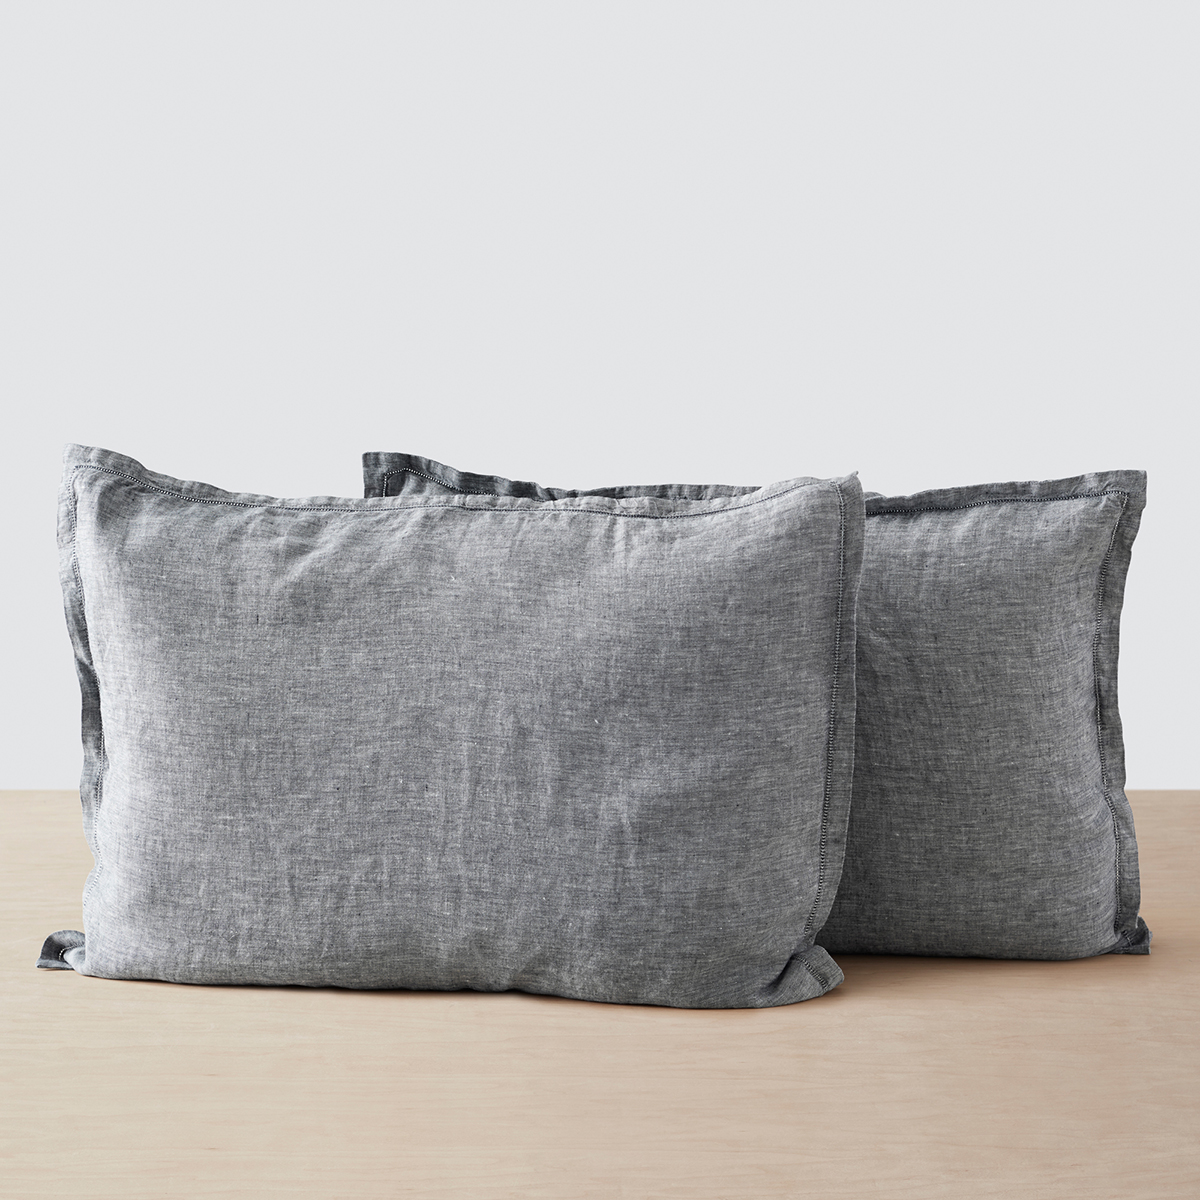 https://www.containerstore.com/catalogimages/503133/10096644-Stonewashed_Linen_Shams_Ind.jpg